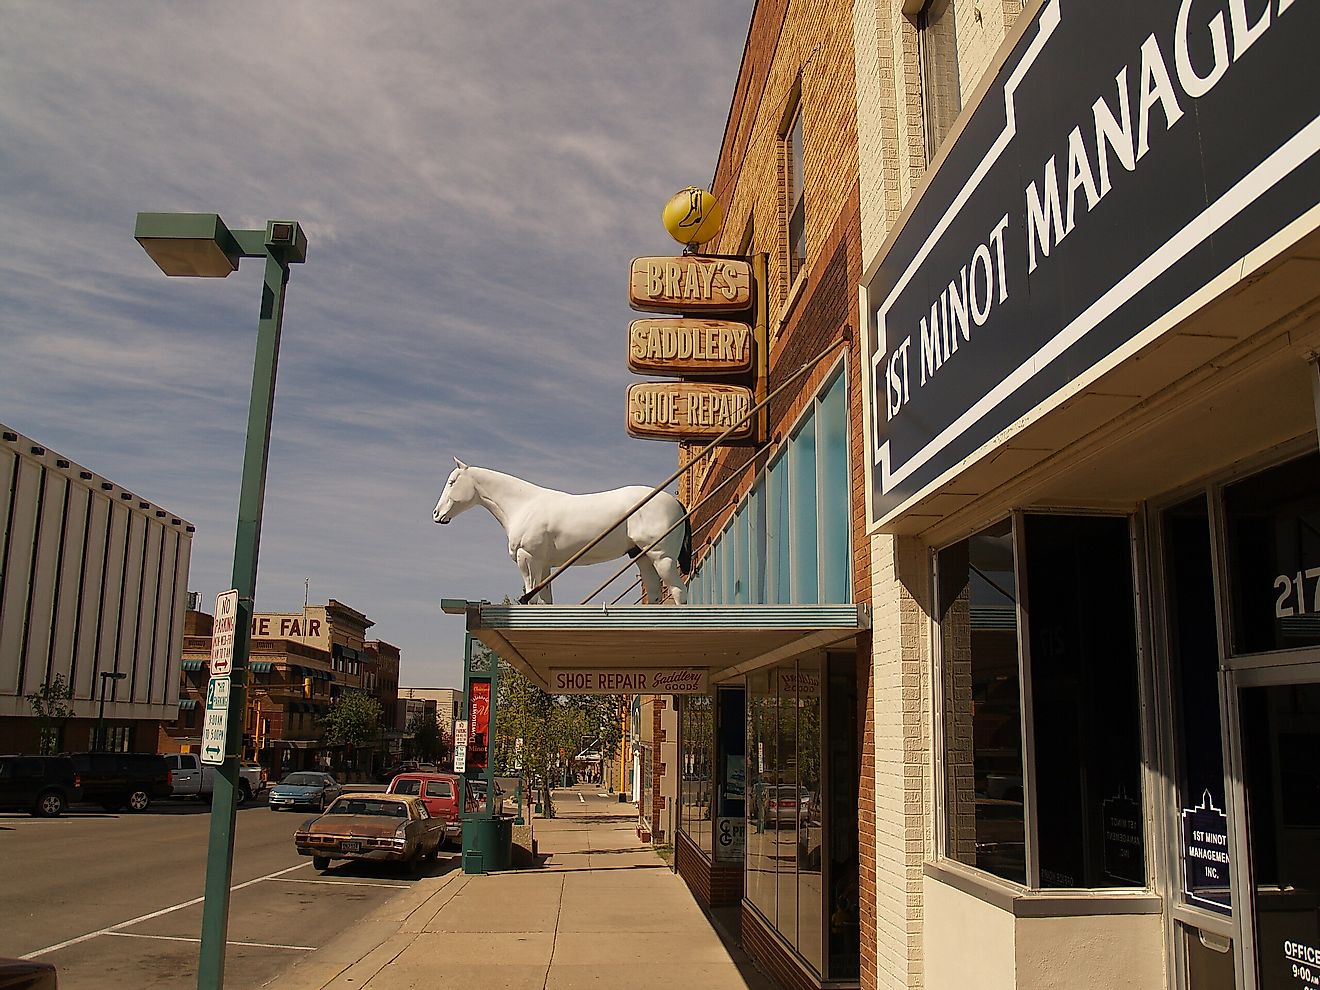 Downtown Minot, North Dakota. Image credit In memoriam afiler, CC BY-SA 2.0 <https://creativecommons.org/licenses/by-sa/2.0>, via Wikimedia Commons